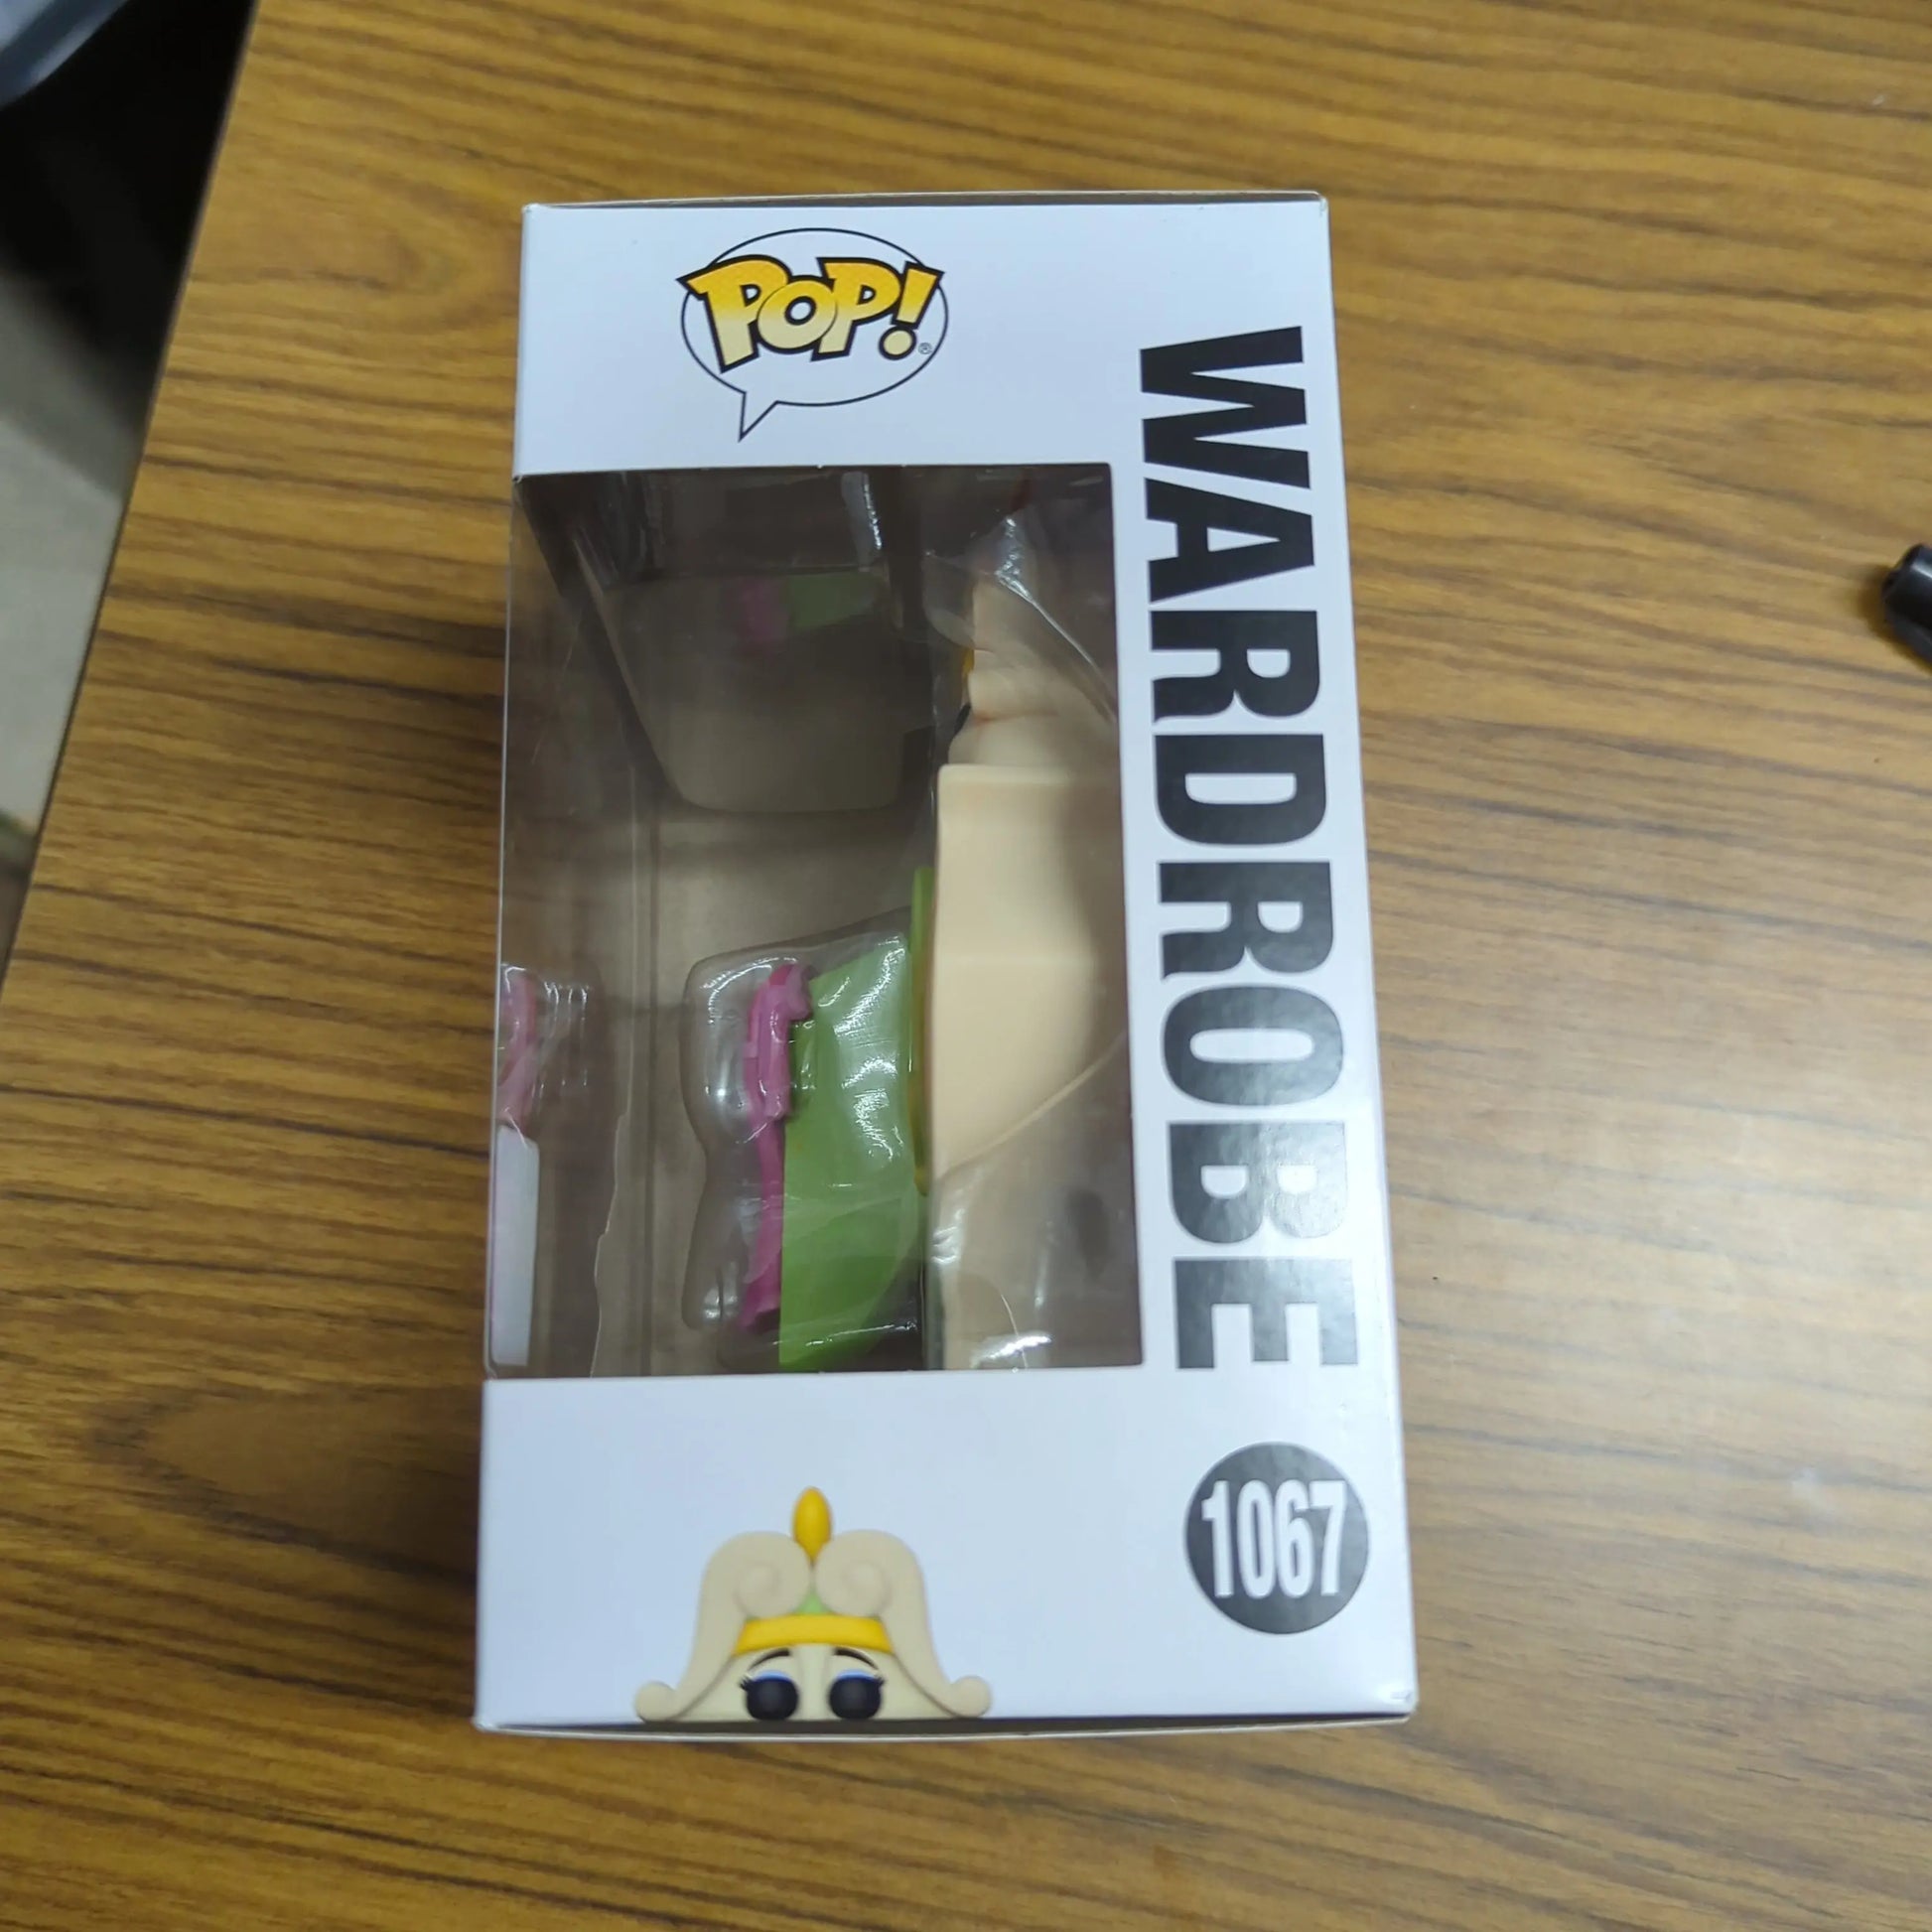 Beauty and the Beast - Wardrobe SDCC 2021 US Exclusive #1067 Pop! Vinyl FRENLY BRICKS - Open 7 Days